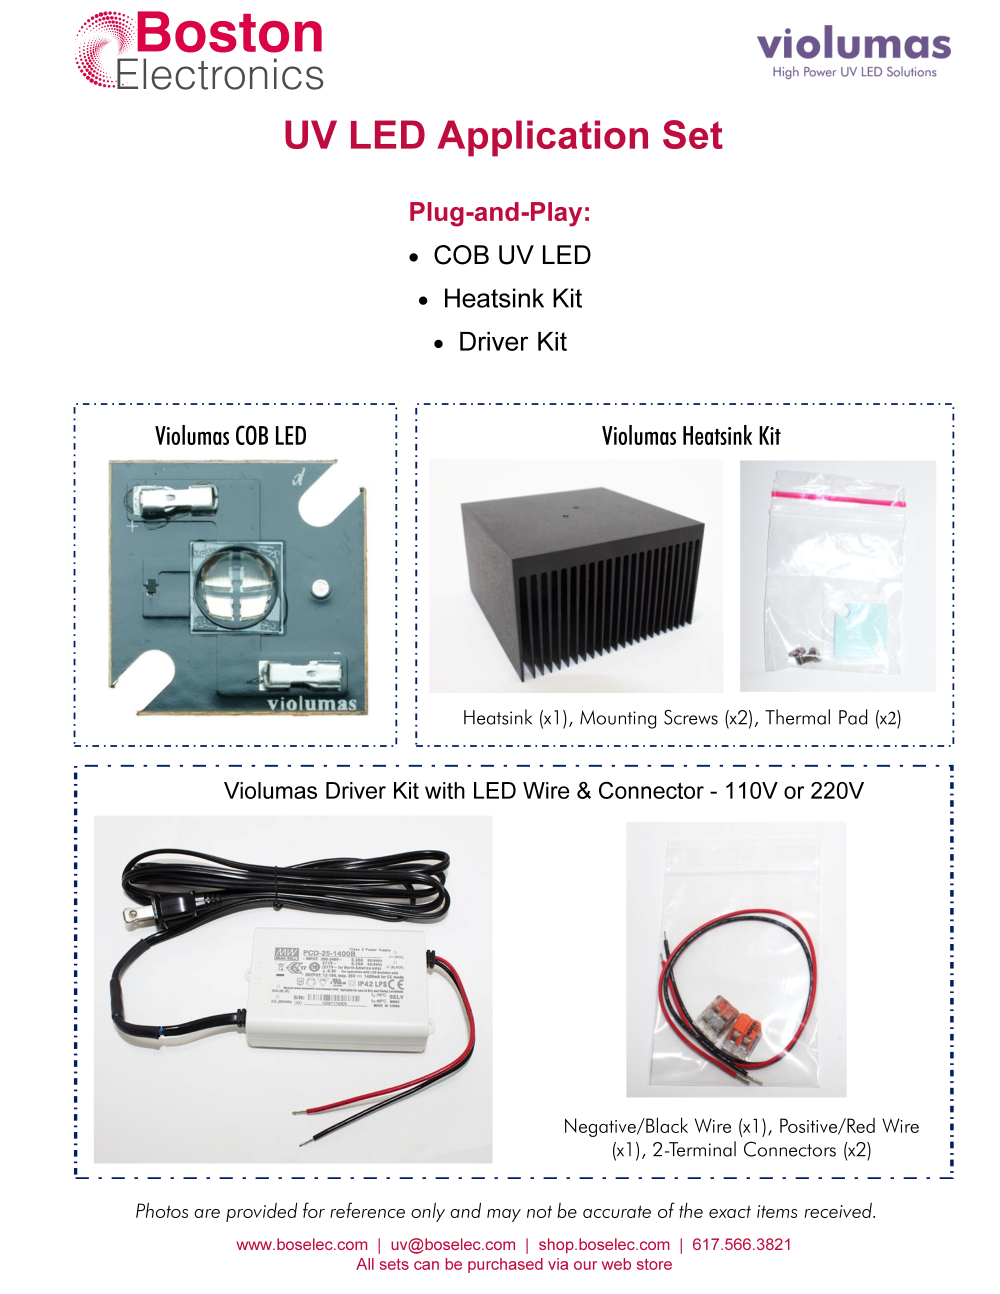 375 nm UV LED Application Set- High Power LED, Heat Sink, and Driver